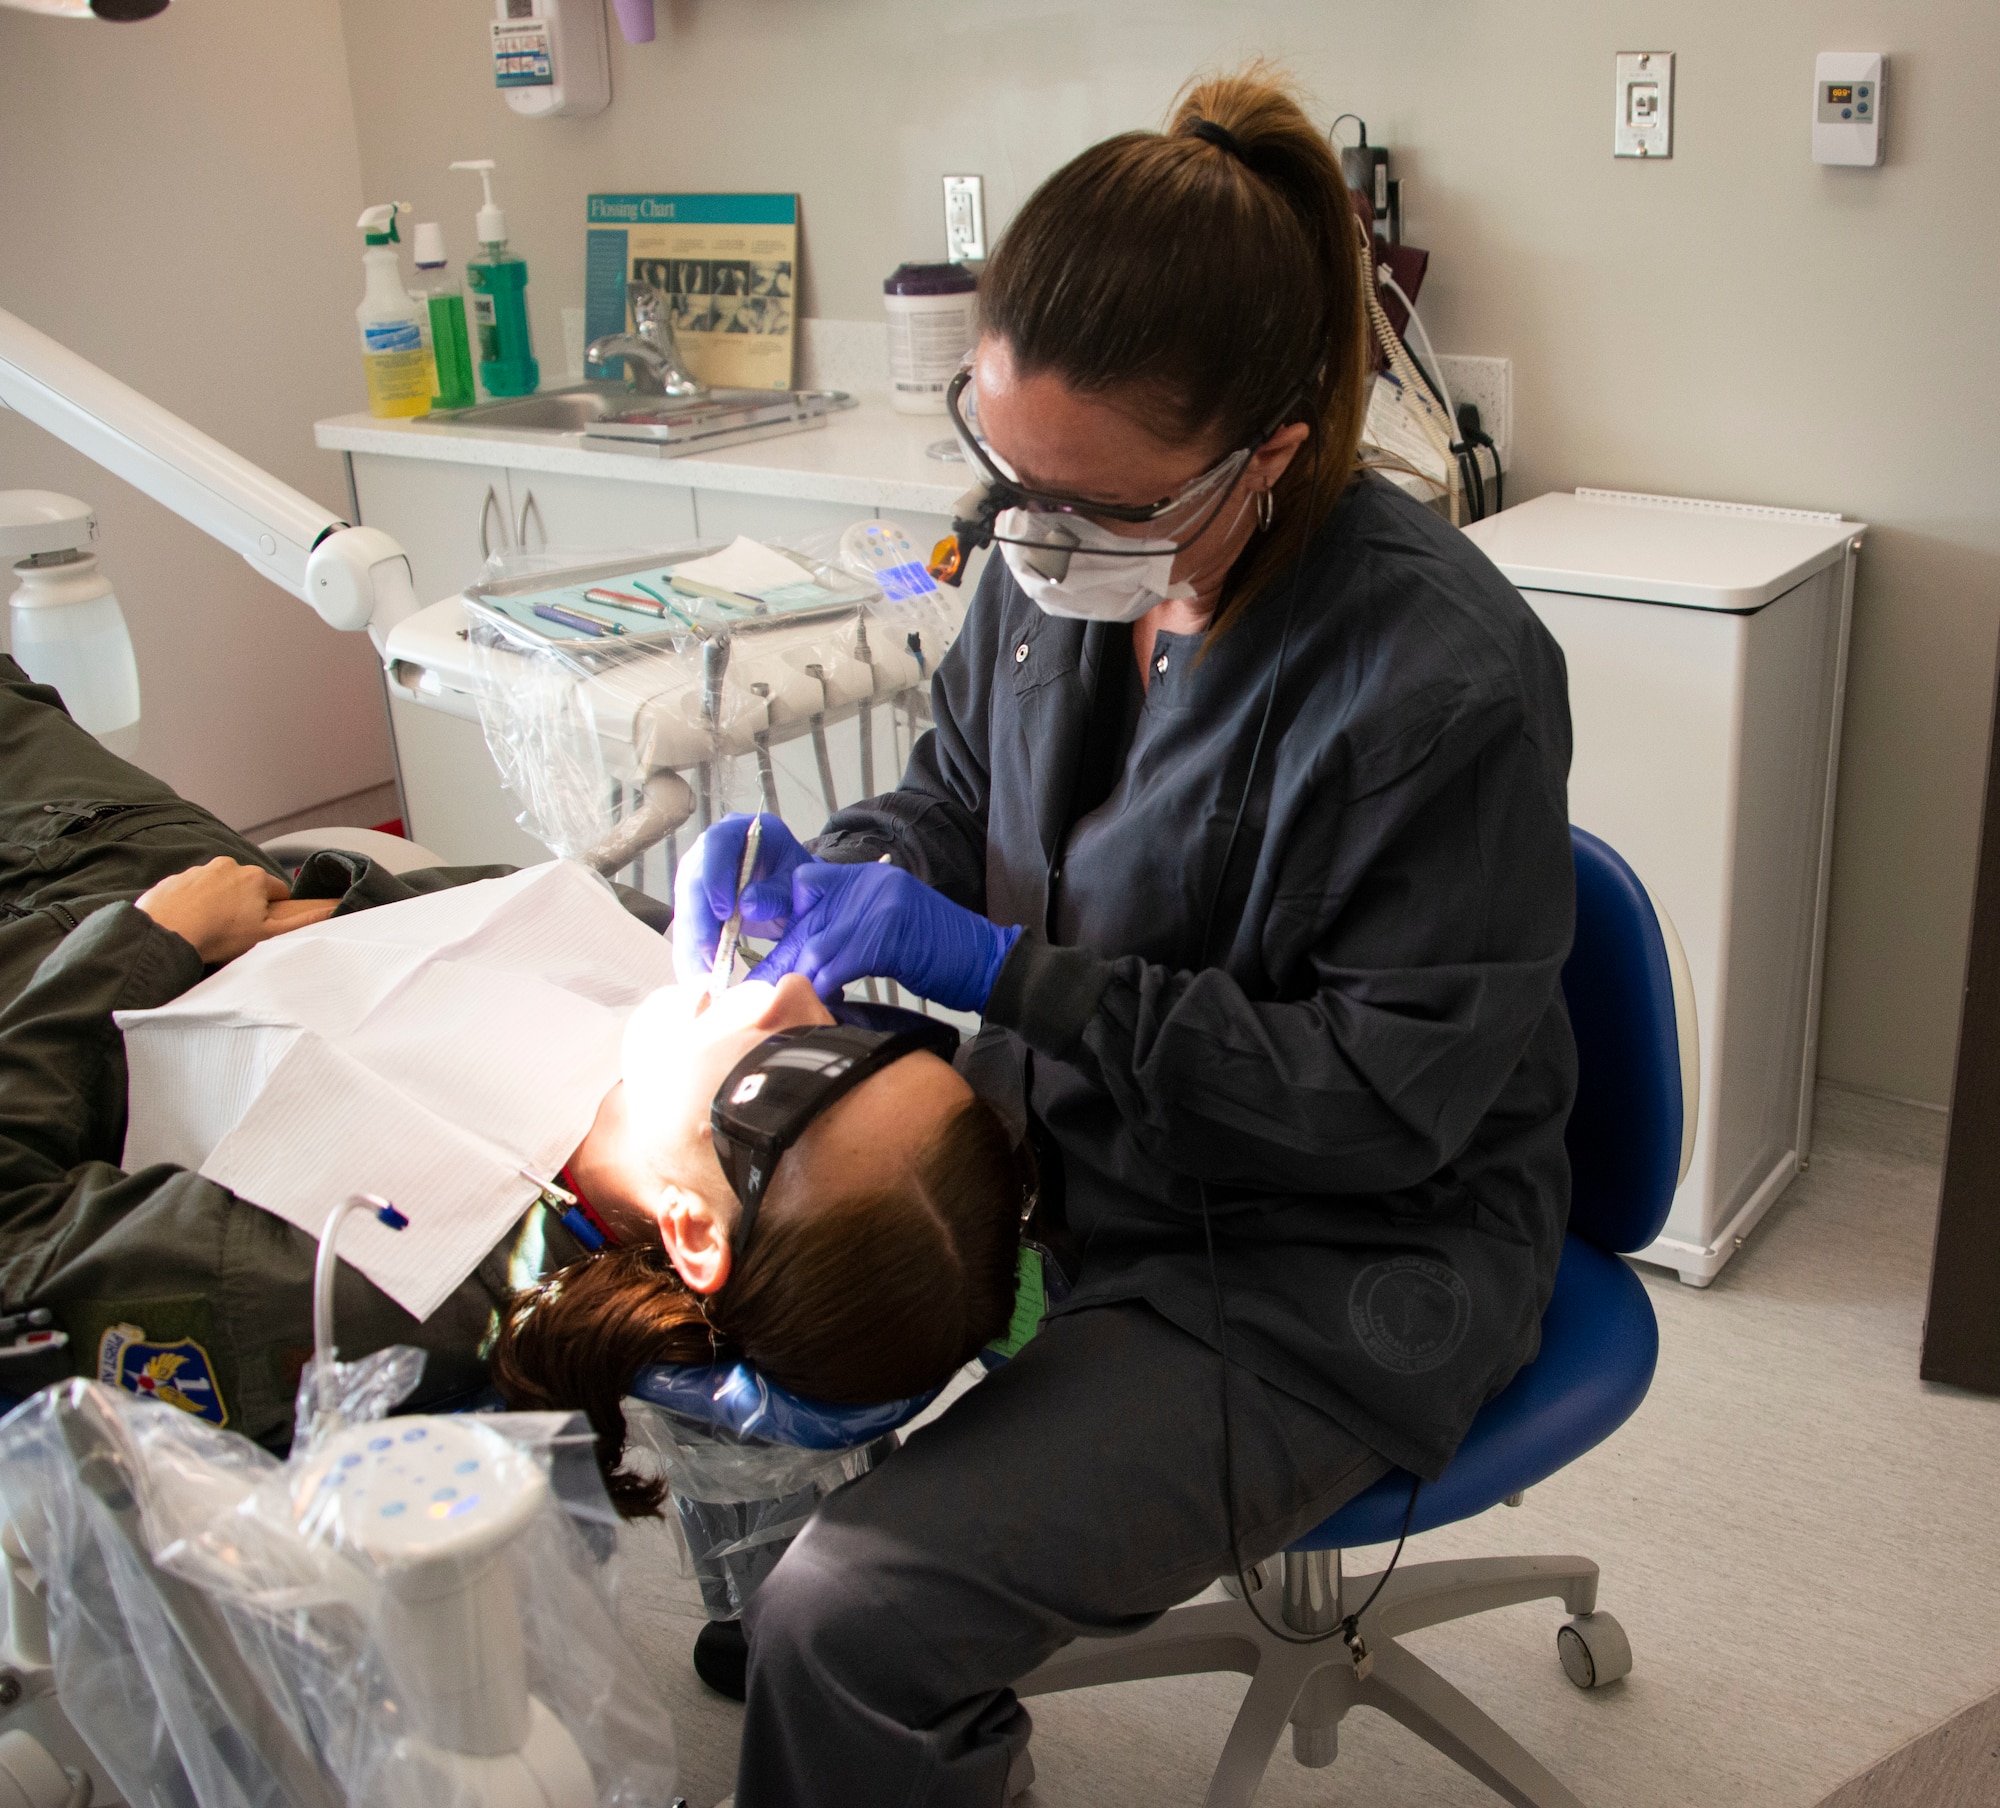 Lori Elliott, 325th Operational Medical Readiness Squadron dental technician, examines a patient at Tyndall Air Force Base, Mar. 4, 2020.  Dental assistants are recognized for the critical part they play in patient care. (U.S. Air Force photo by 2nd Lt. Kayla Fitzgerald)